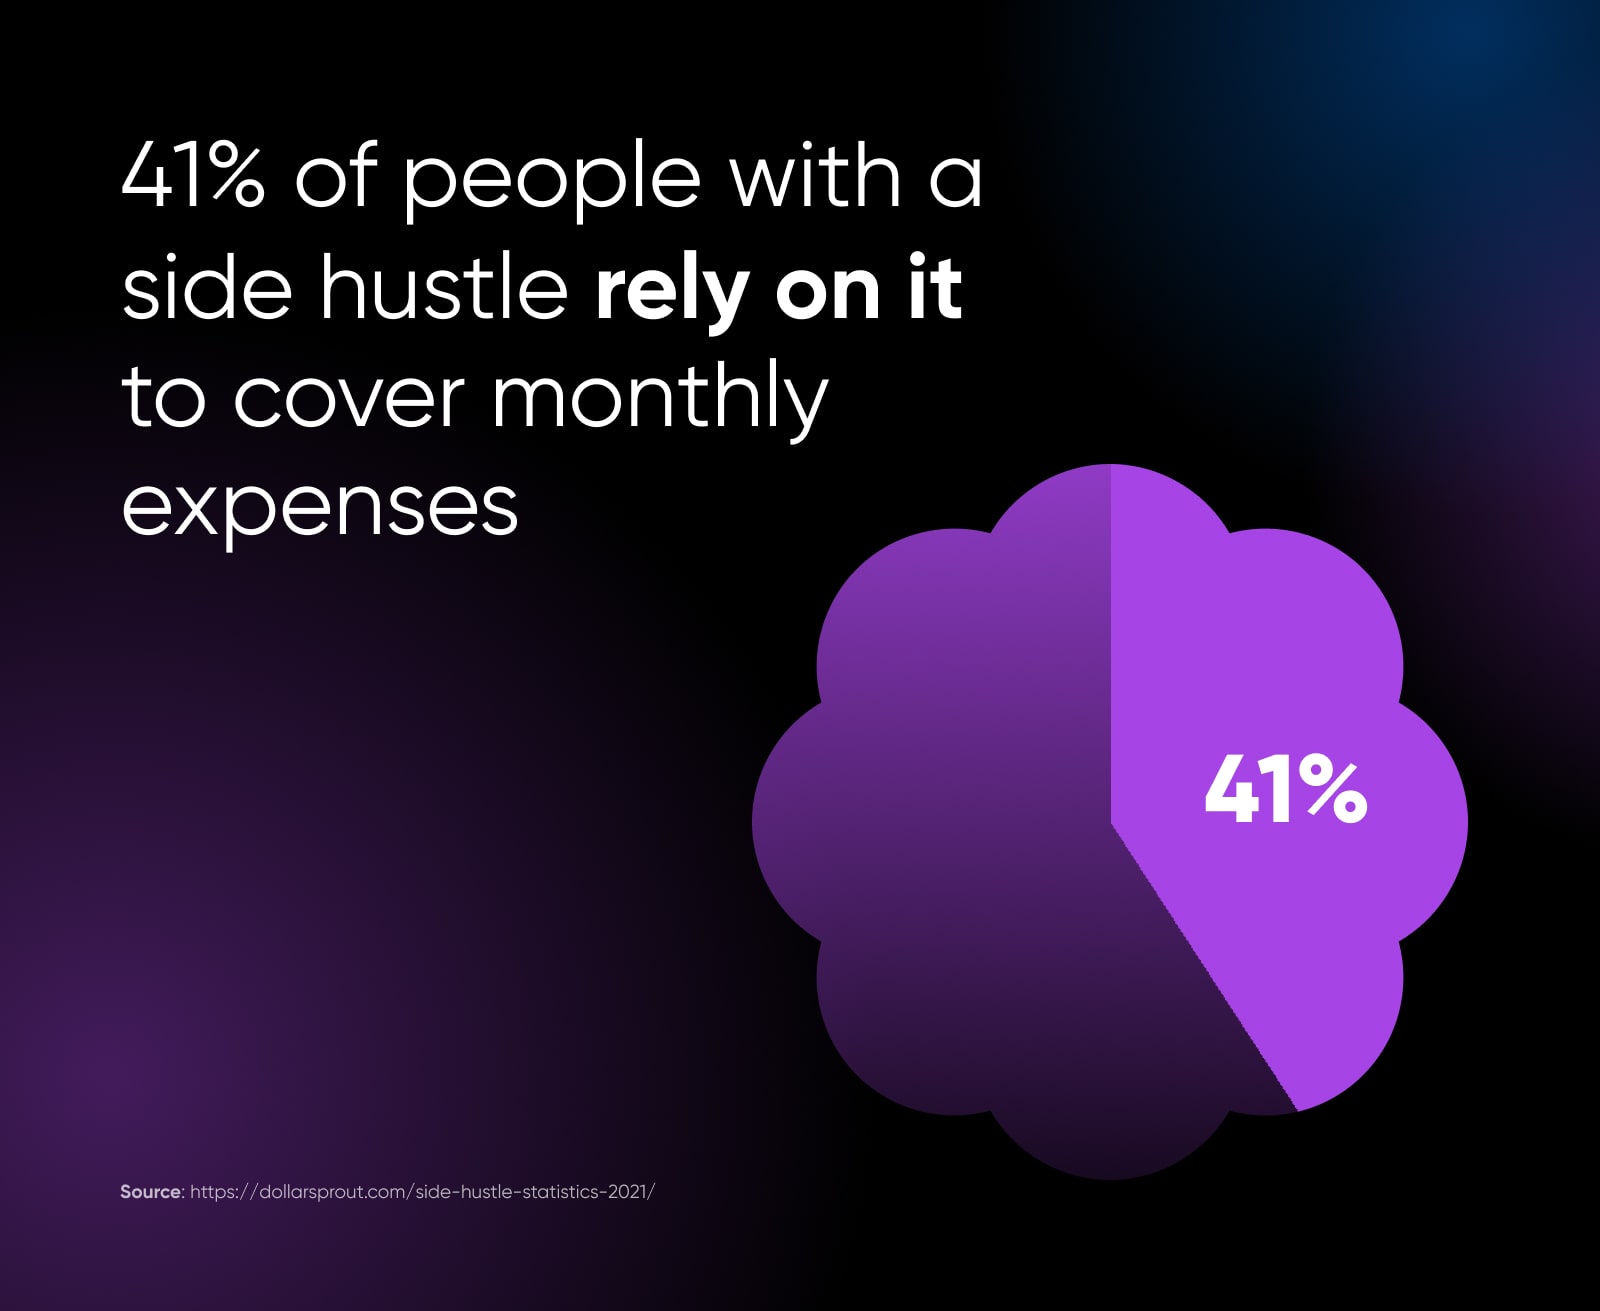 41% of people with a side hustle rely on it to cover monthly expenses